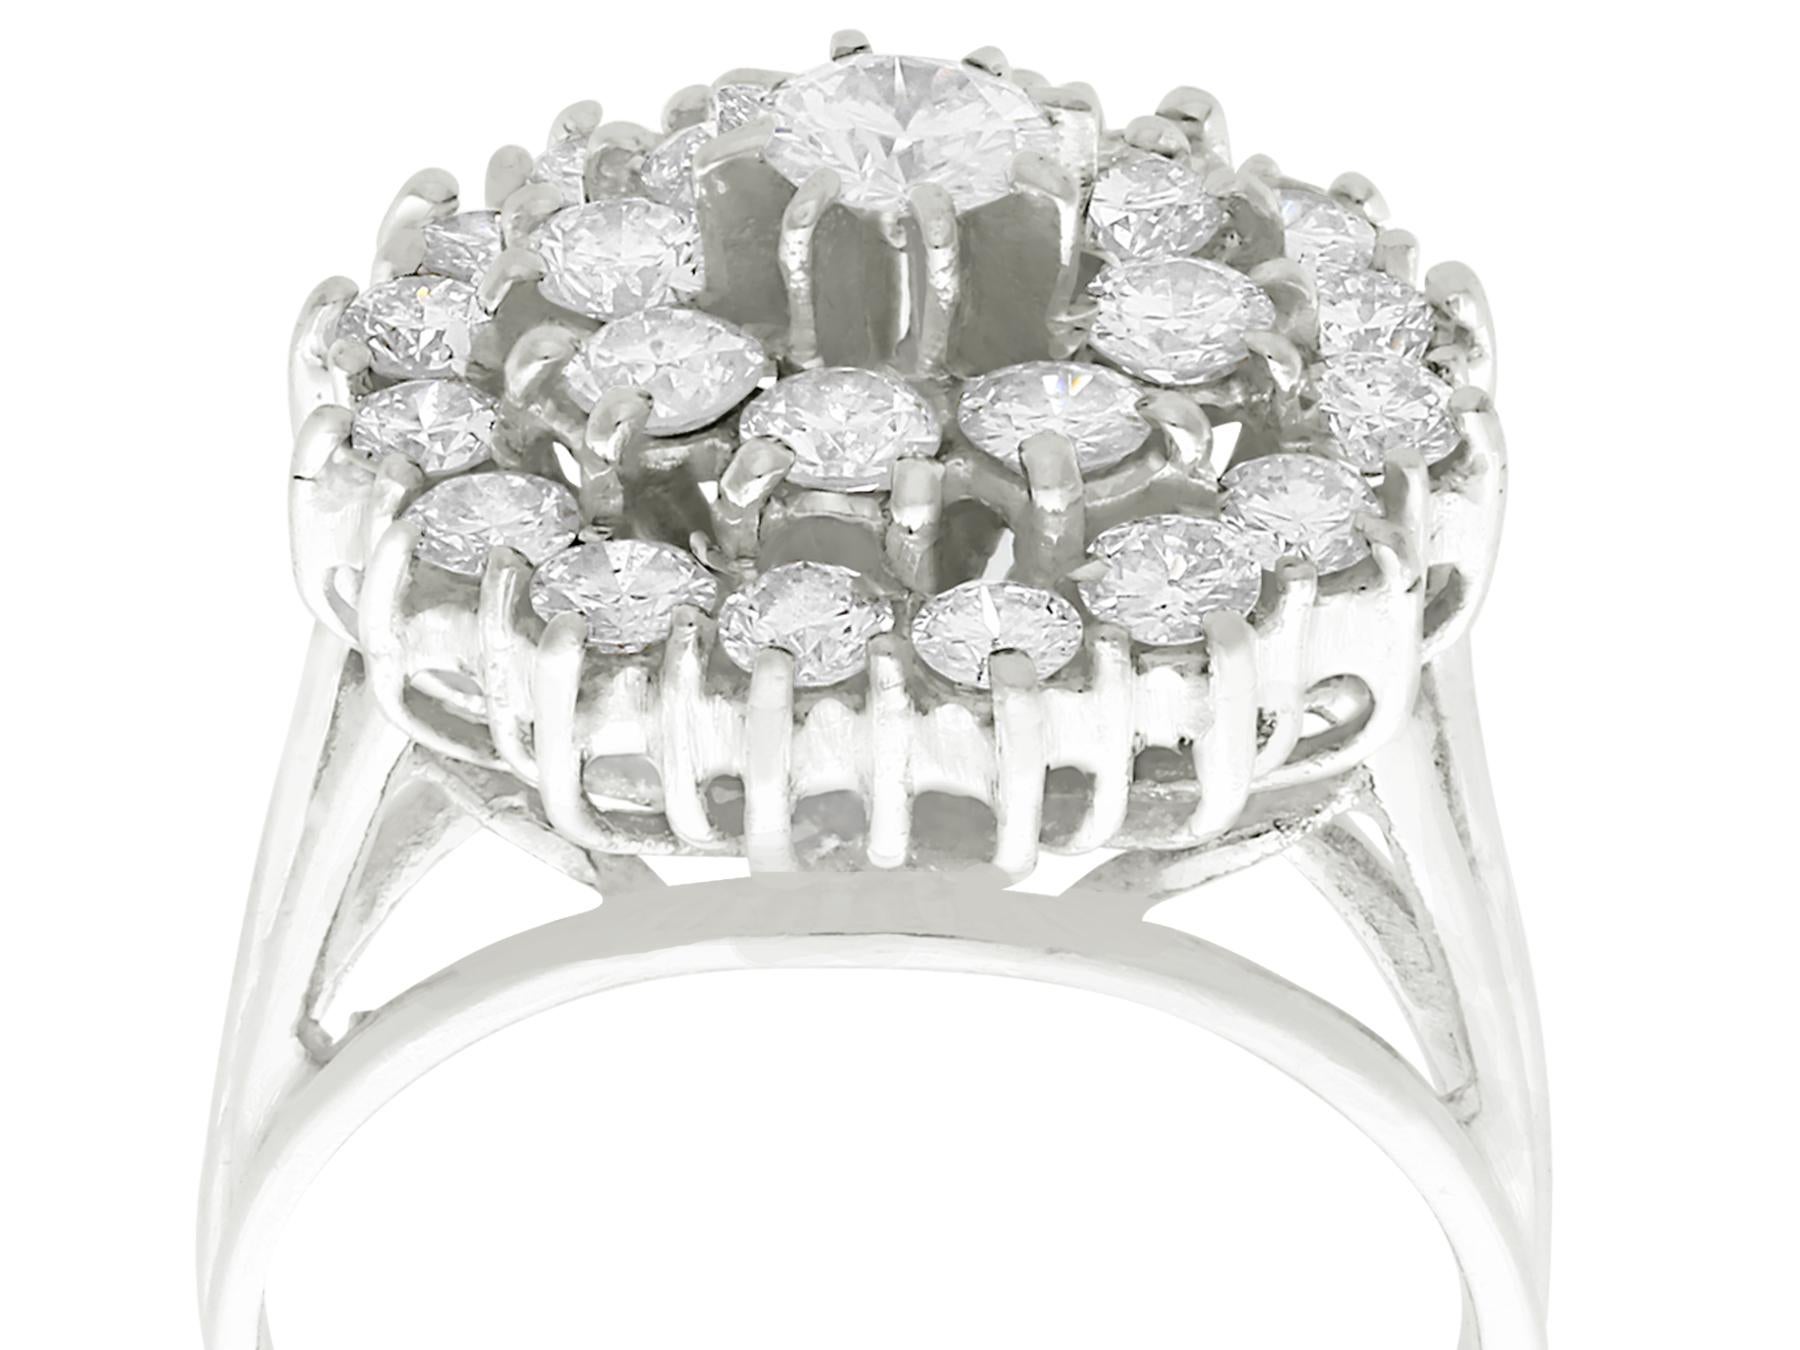 A large and impressive vintage 2.25 carat diamond and 18 karat white gold dress ring; part of our vintage jewelry and estate jewelry collections

This impressive white gold diamond cluster ring has an impressive boat style frame.

The impressive